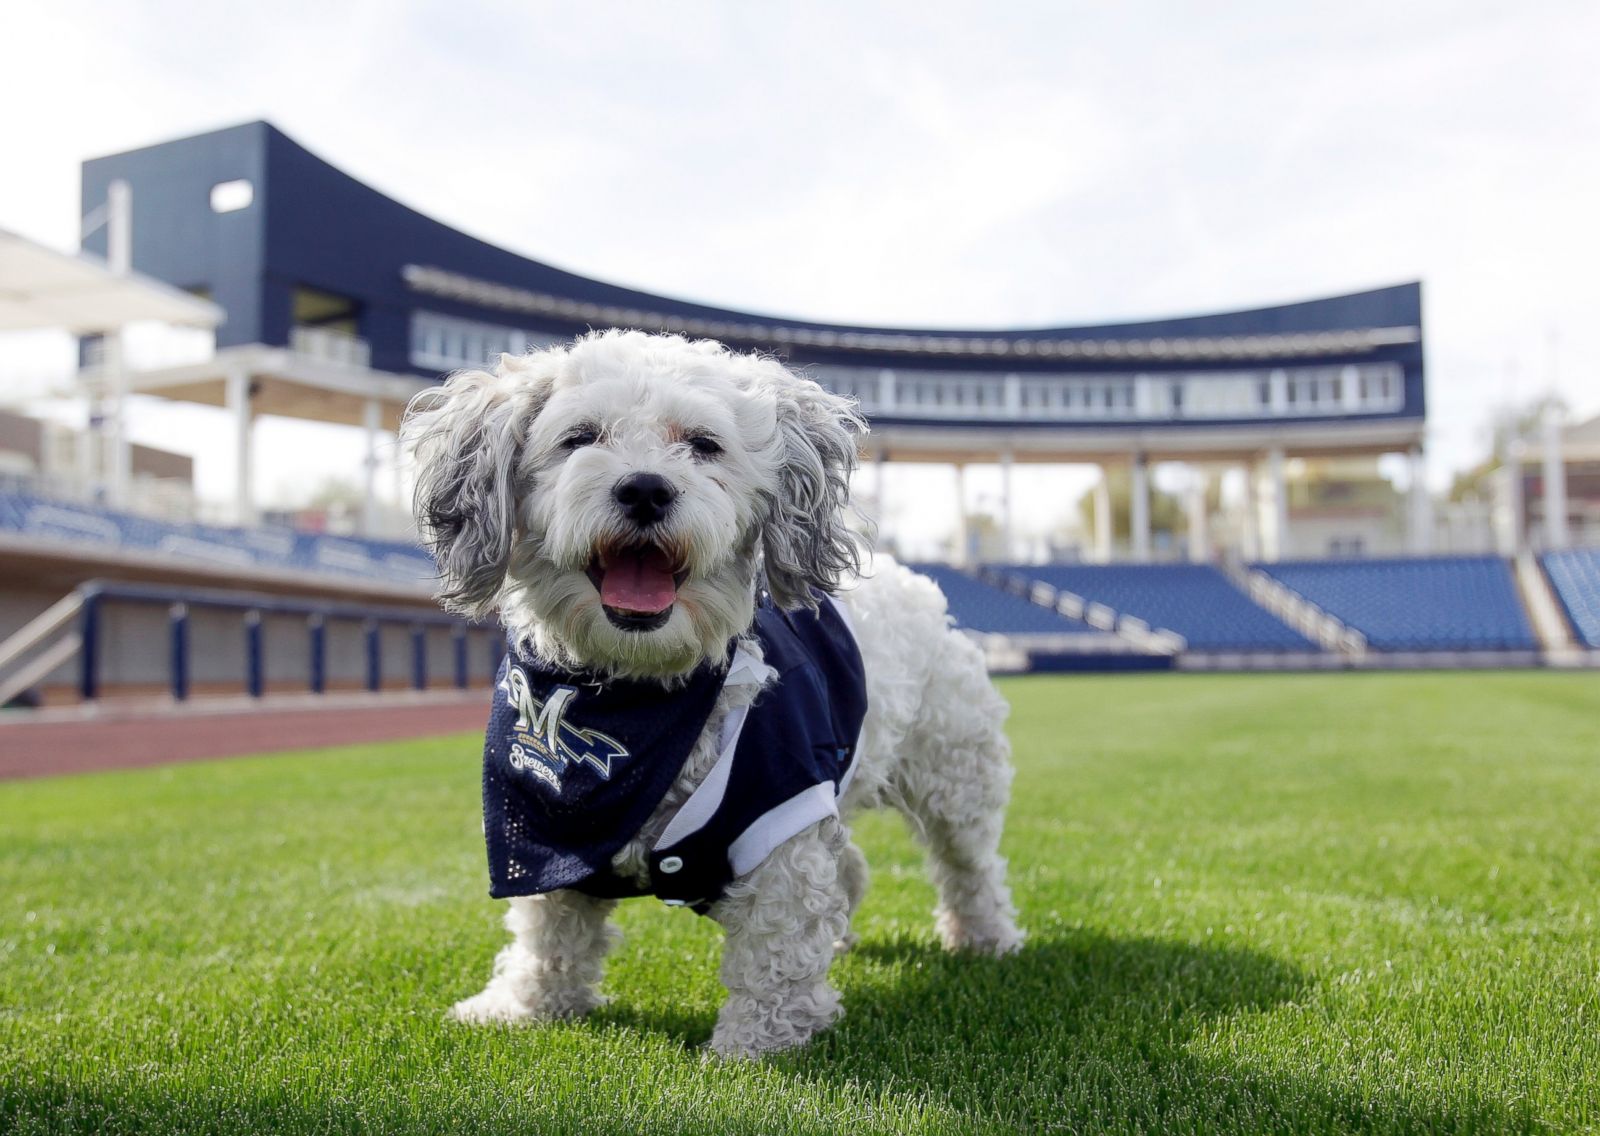 the brewers mascot